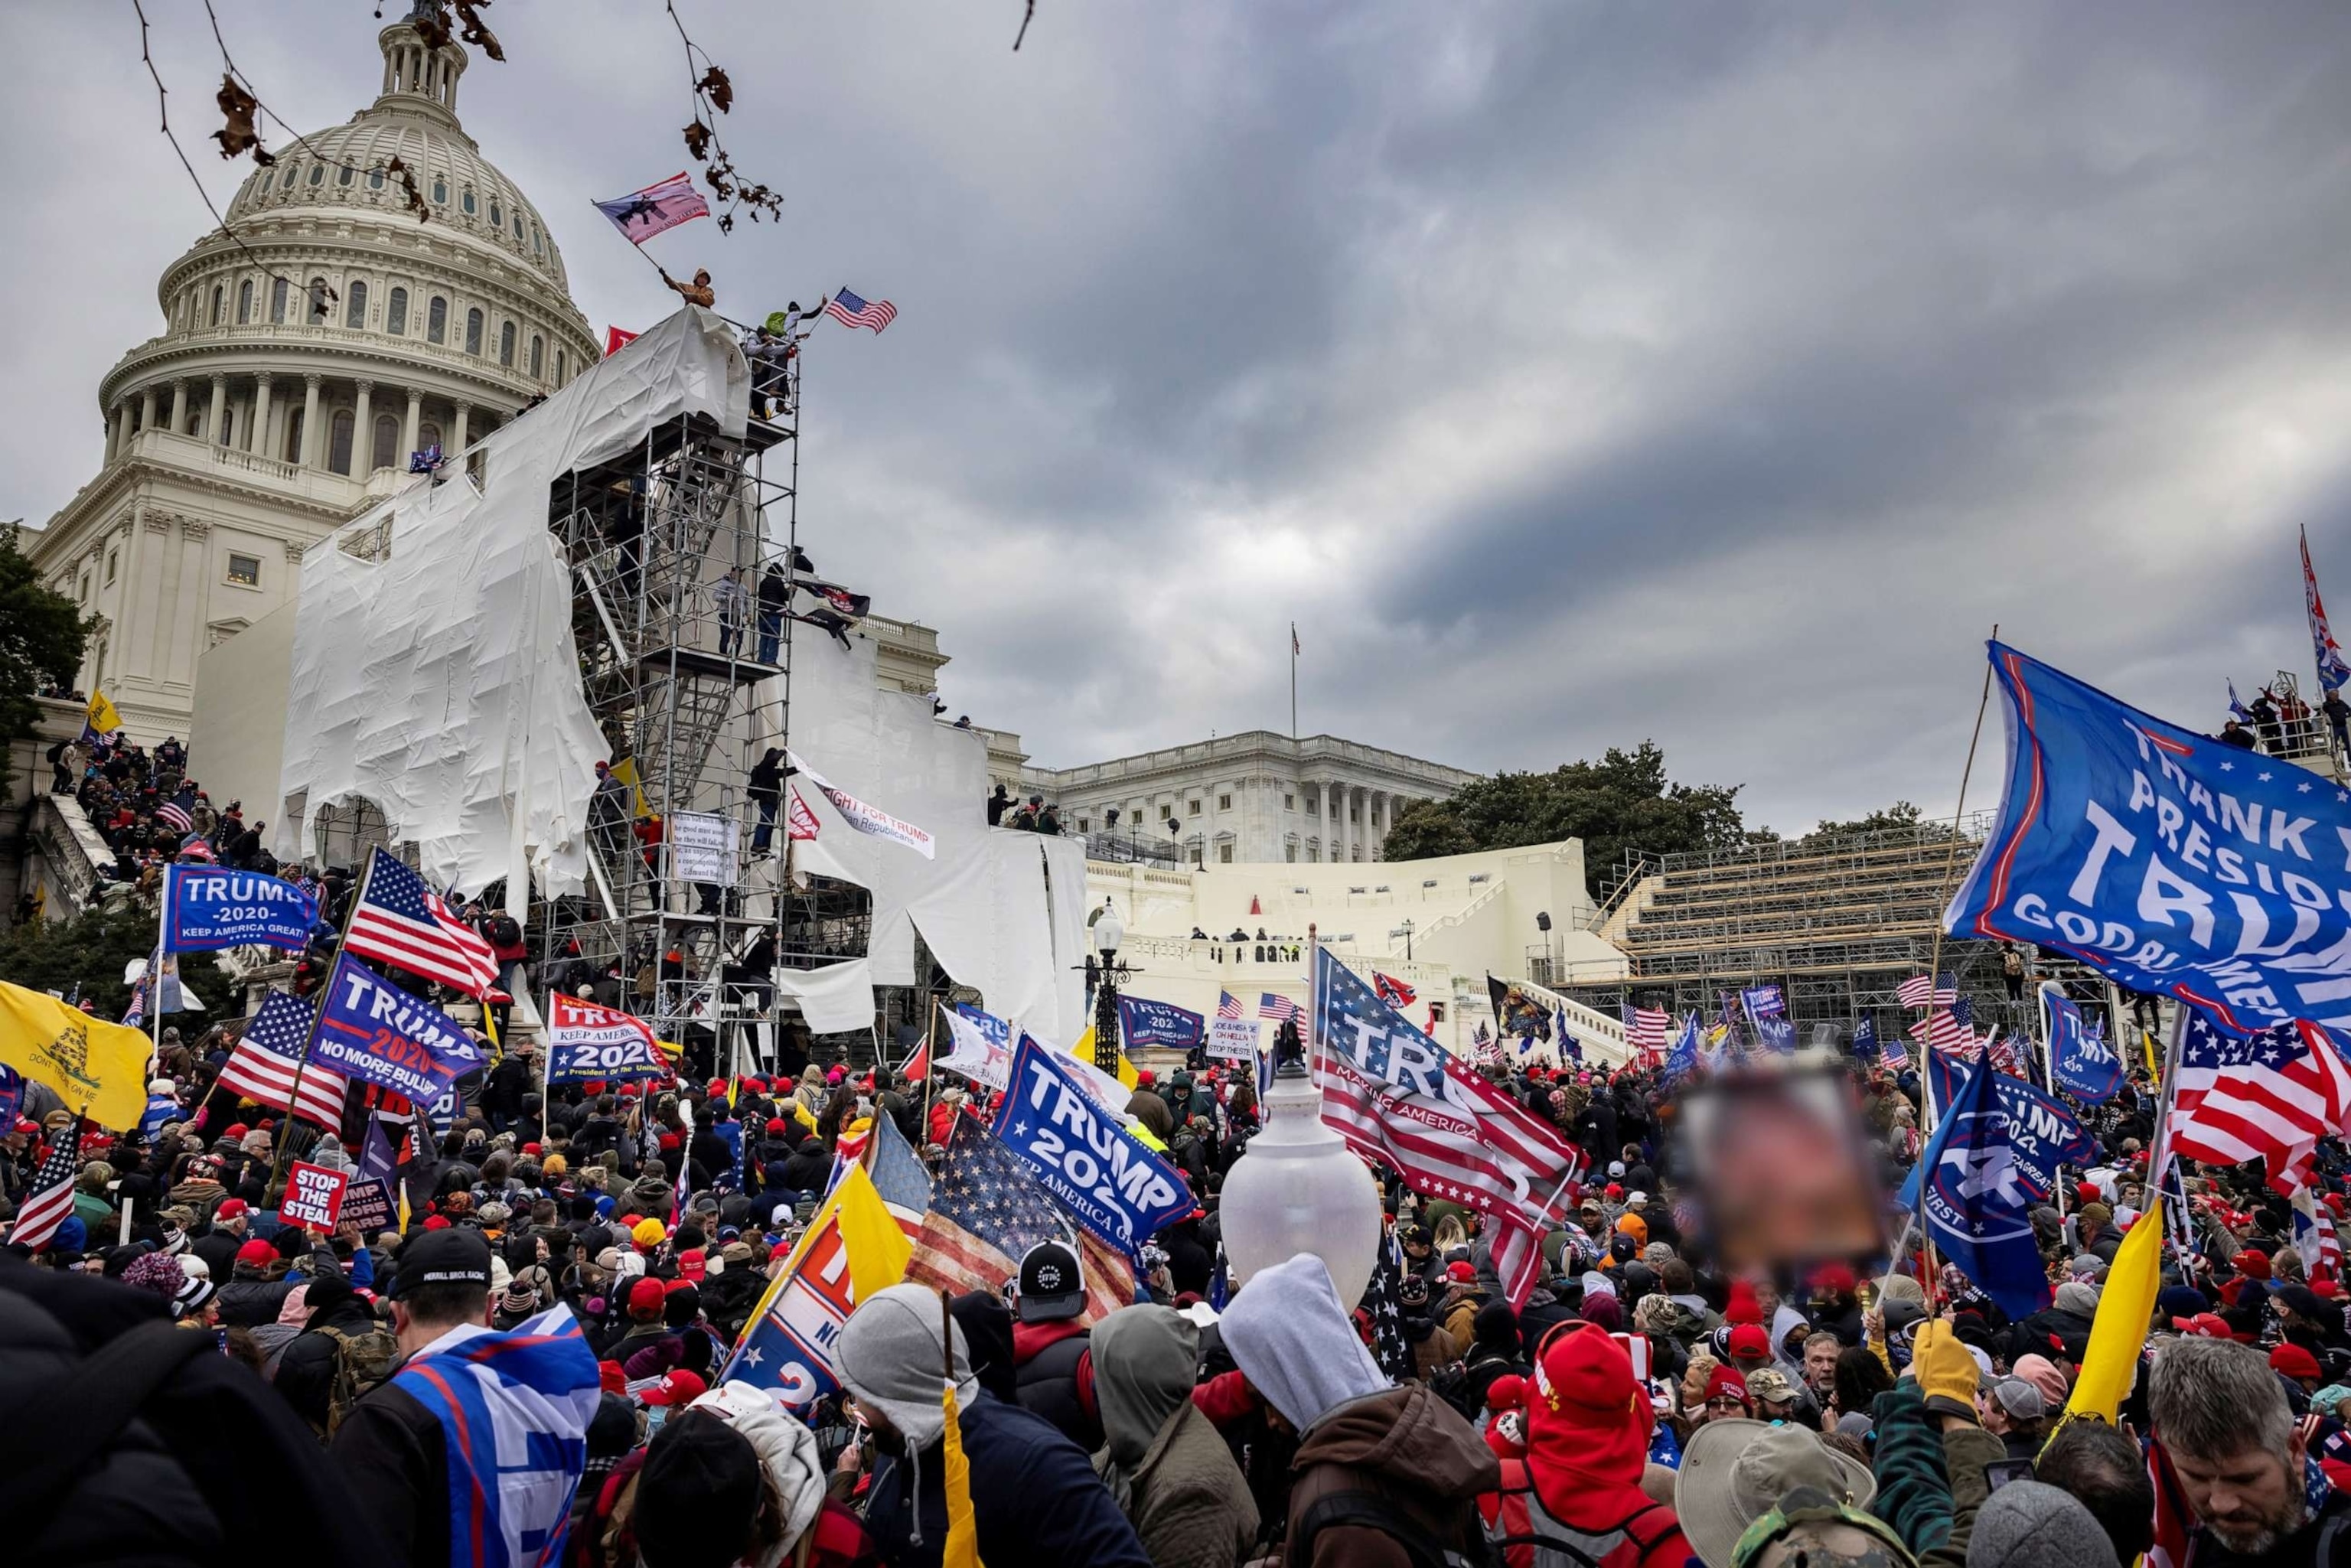 PHOTO: Trump supporters clash with police and security forces as people try to storm the US Capitol on January 6, 2021 in Washington, DC.